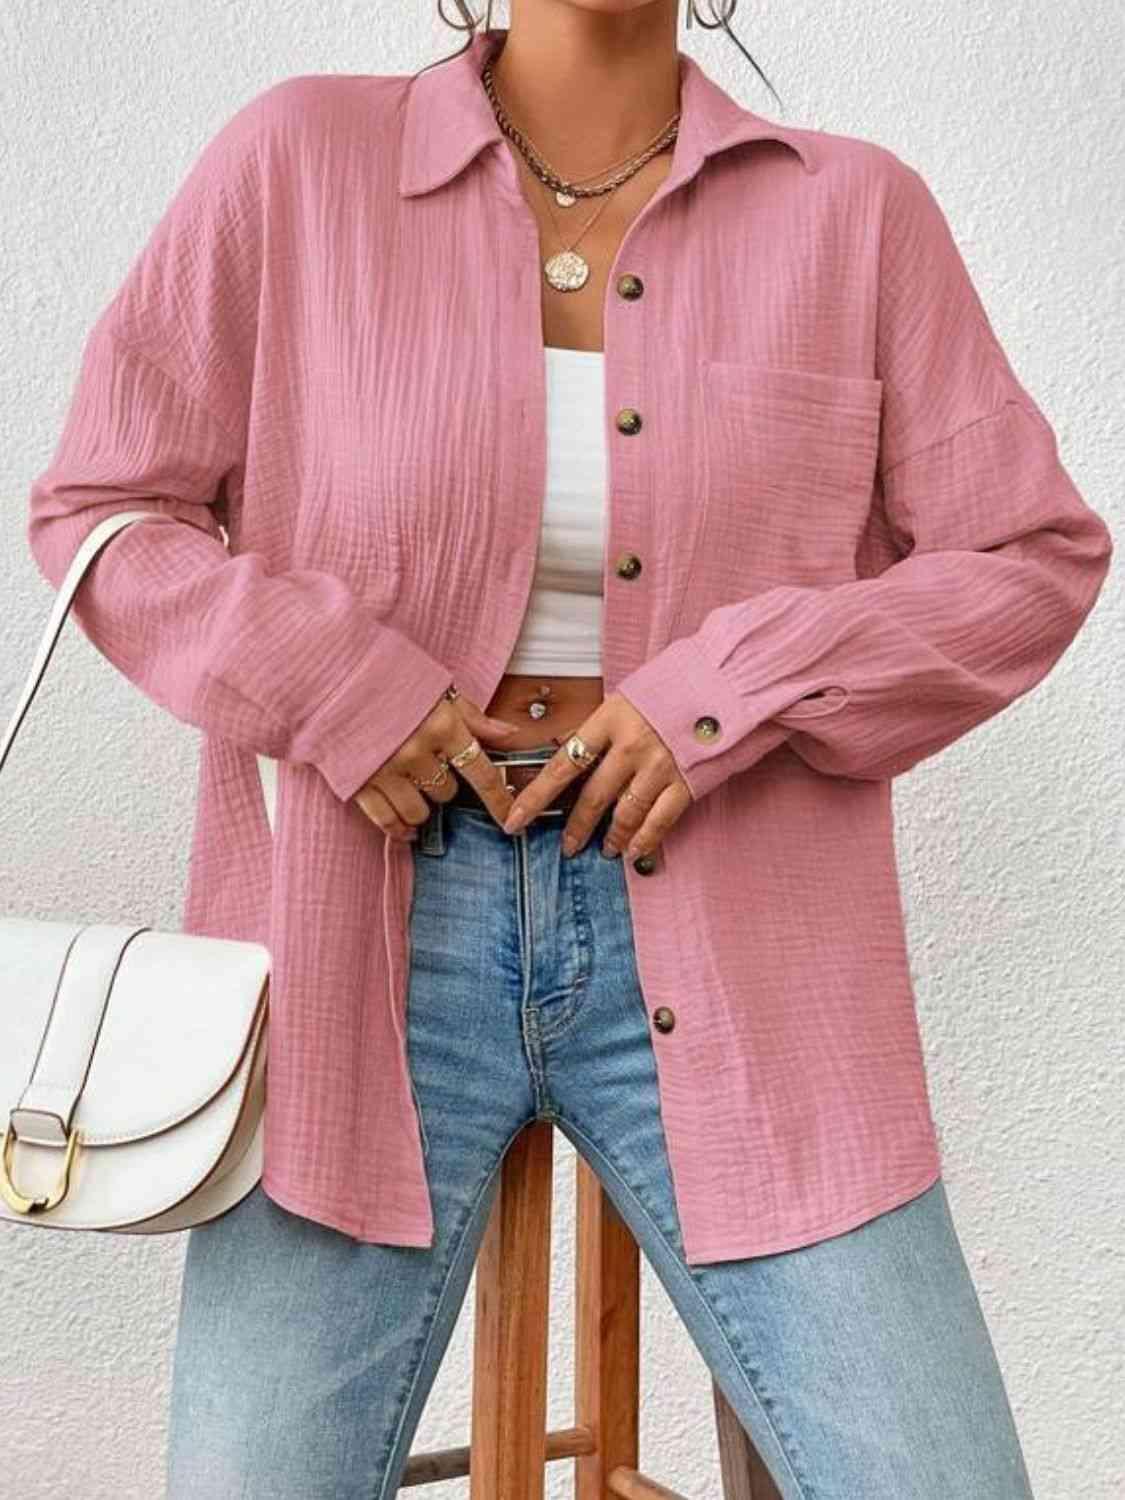 a woman standing on a stool wearing a pink jacket